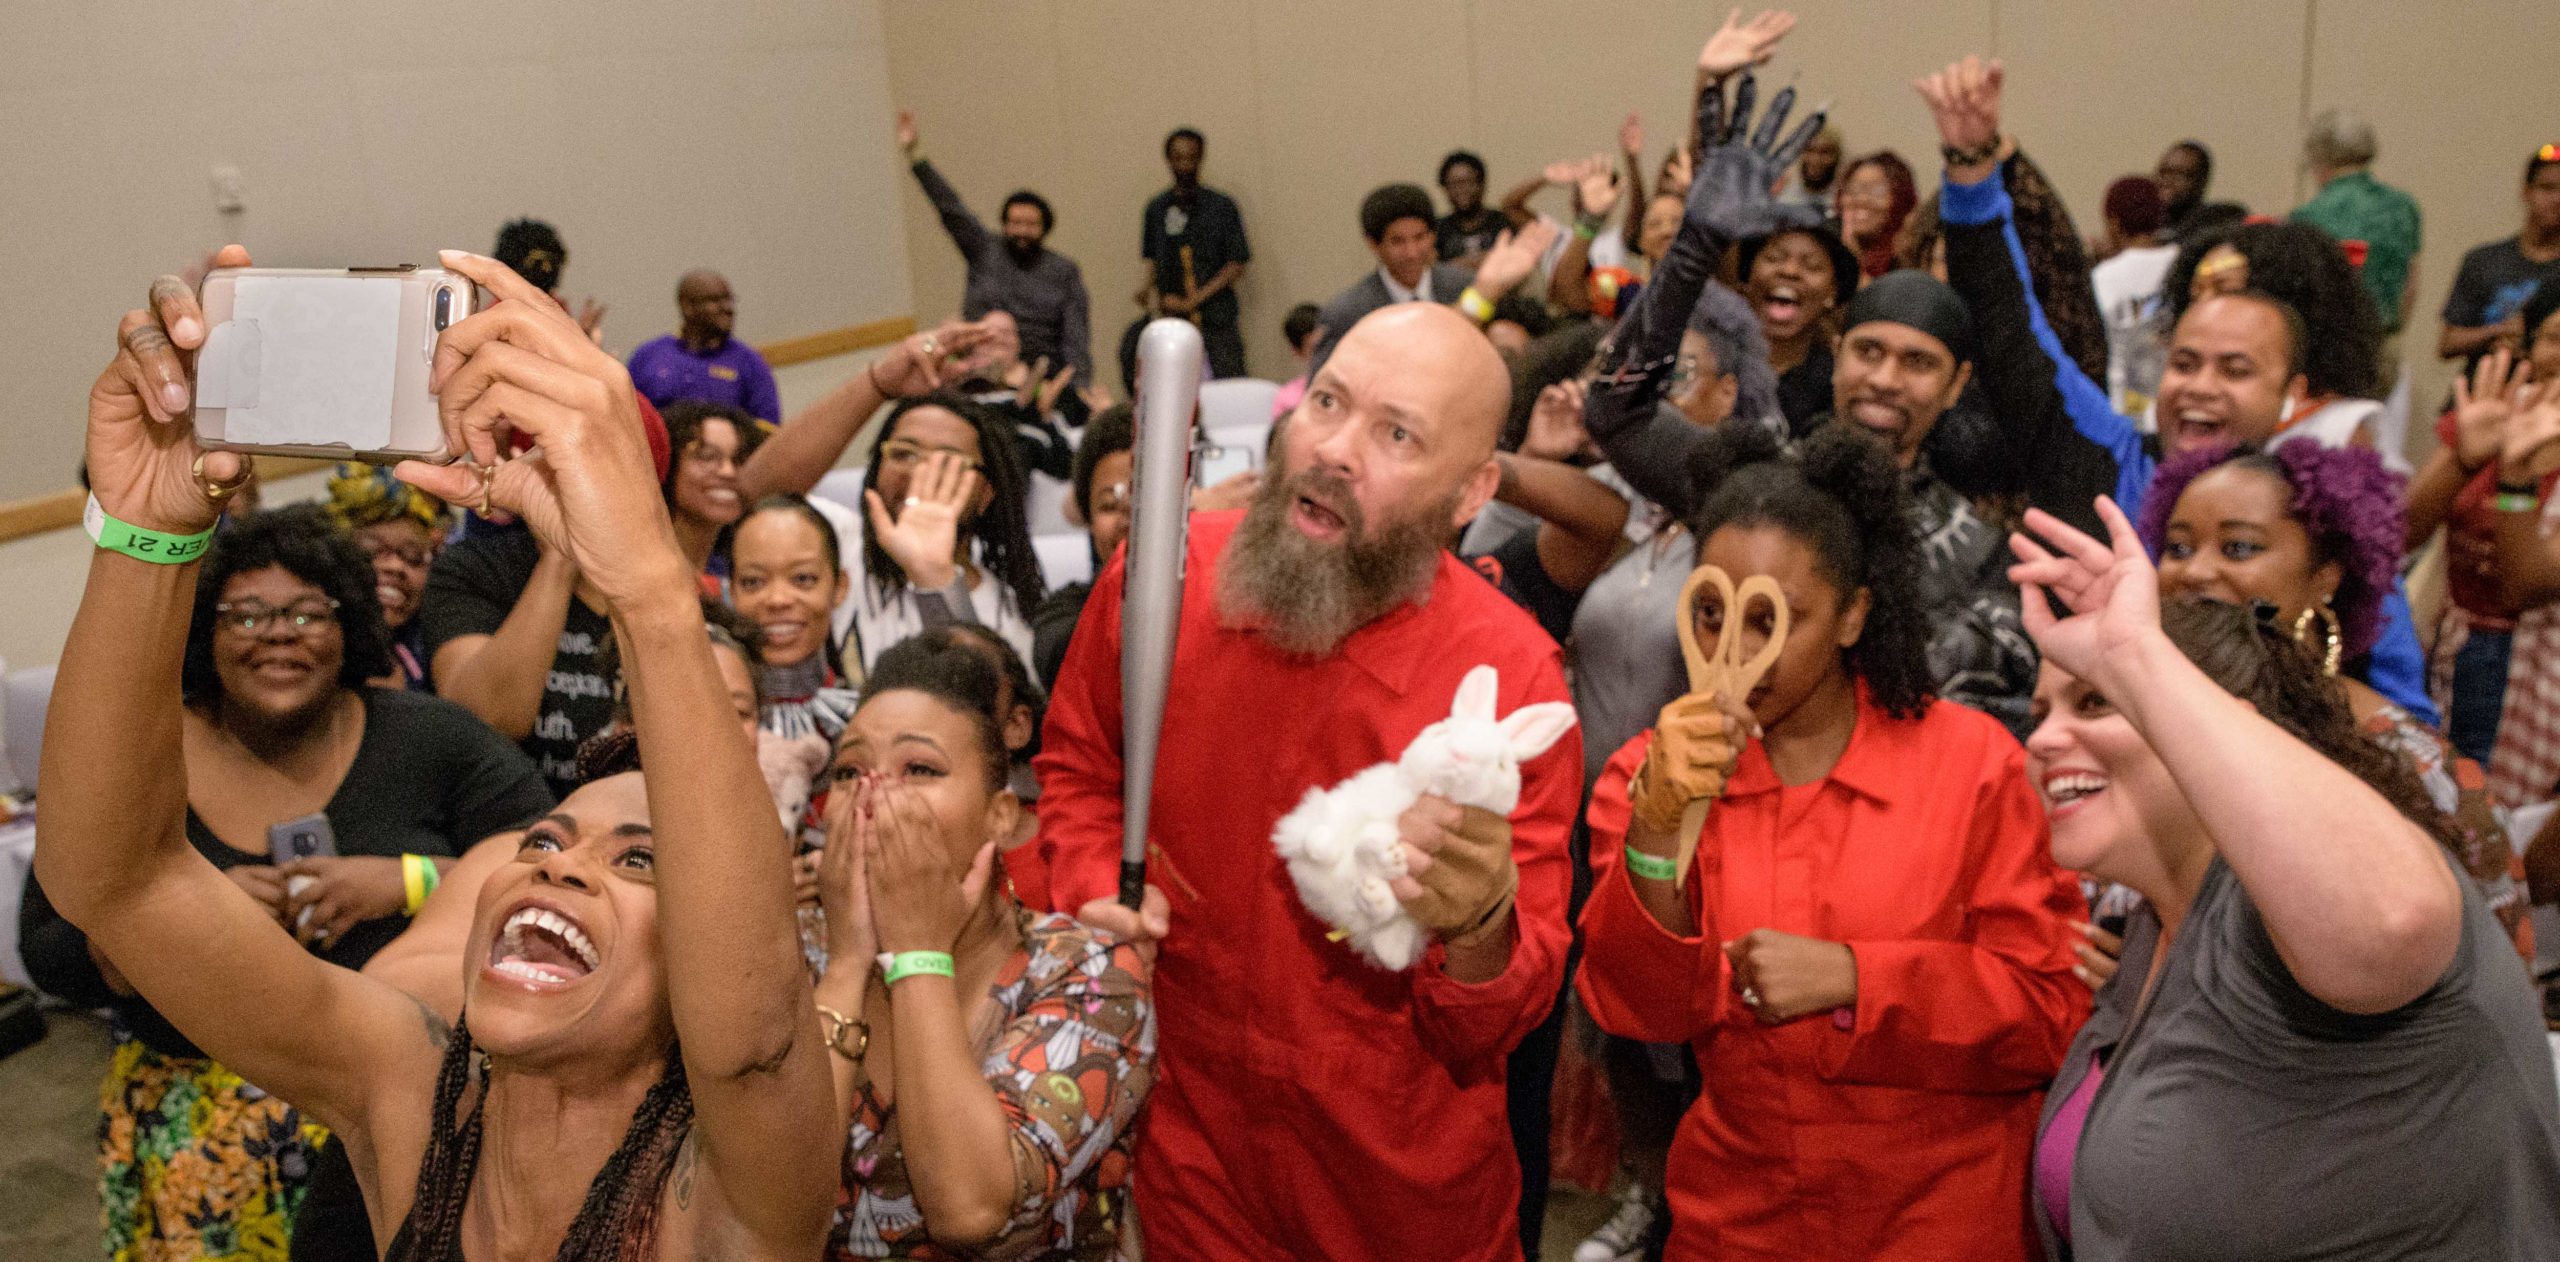 Hannah Beachler, the Academy Award winning film production designer for the movie Black Panther, left, takes a photo with attendees of Blerdfest, New Orleans' first ever black nerd convention, that celebrates, anime, comics, cosplay, and sci-fi at Algiers Auditorium in New Orleans, La. Saturday, April 6, 2019. Photo by Matthew Hinton